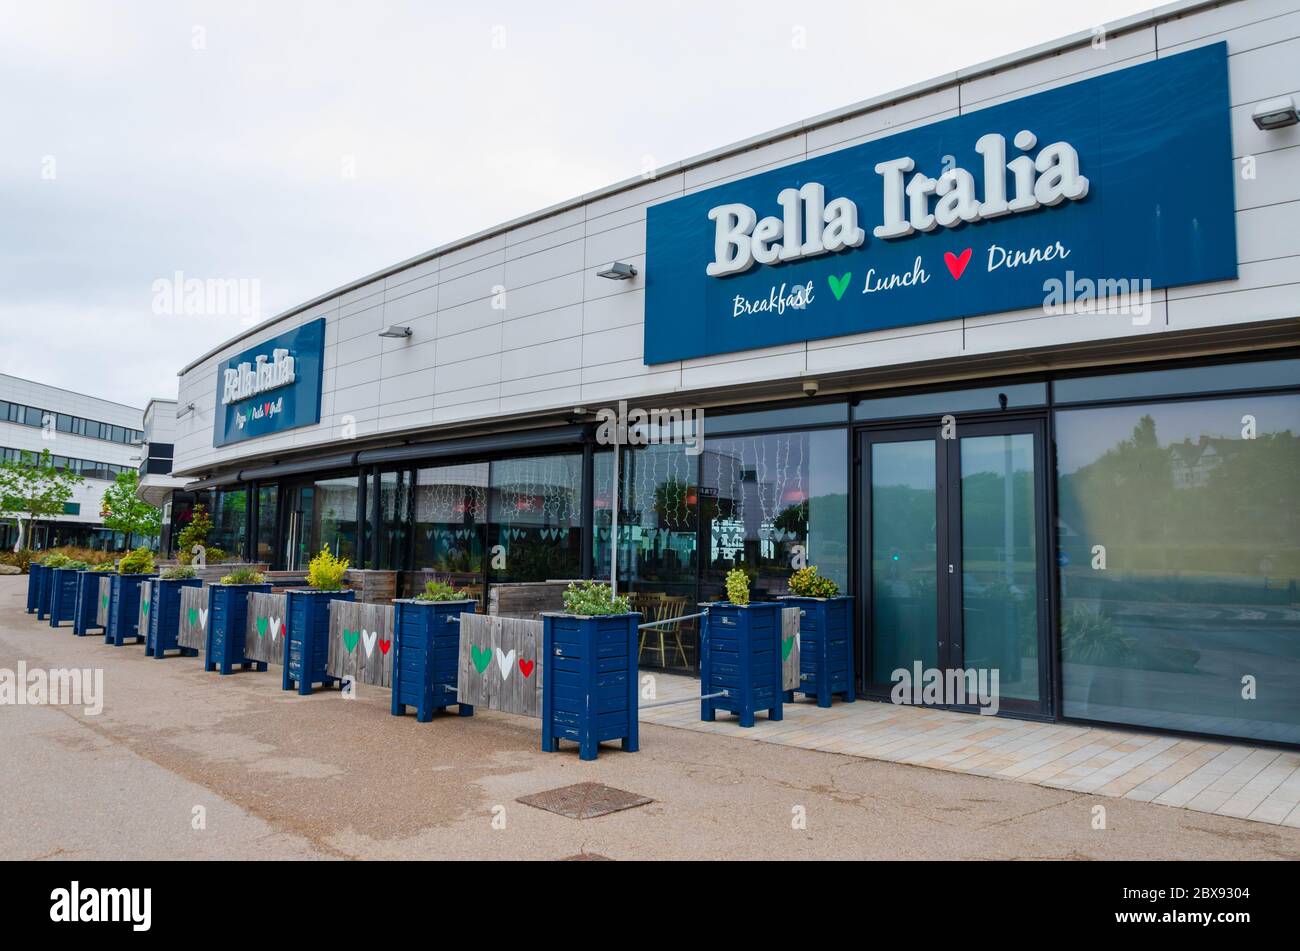 New Brighton, UK: Jun 3, 2020: A Bella Italai restaurant is temporarily closed due to the covid-19 pandemic Stock Photo